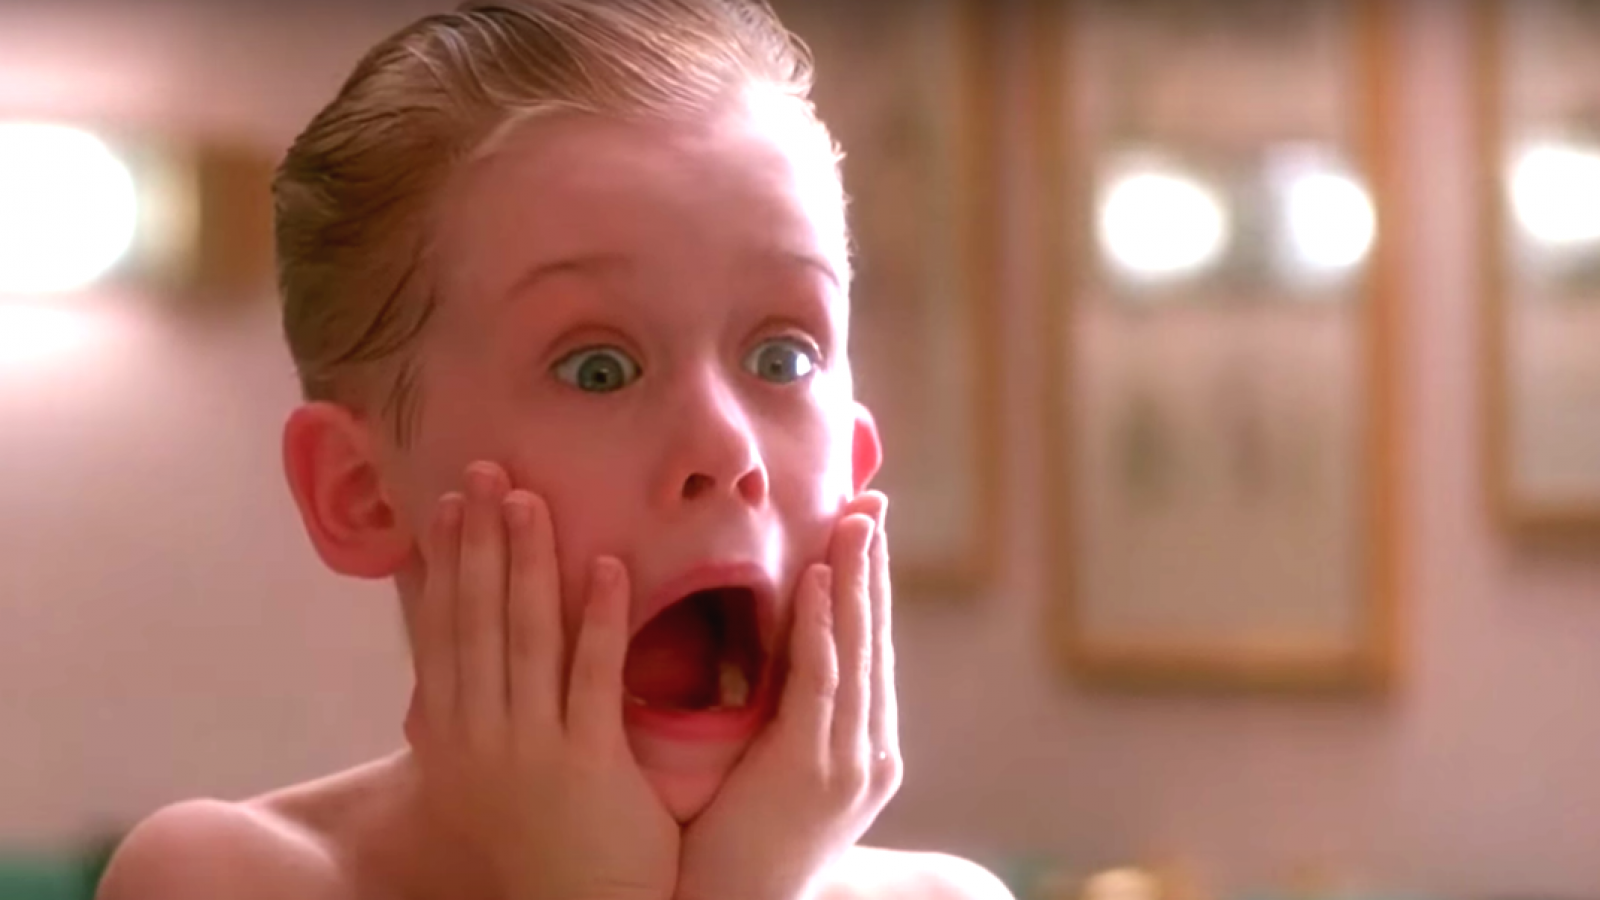 Home Alone's Macaulay Culkin doesn't make any money from starring in film